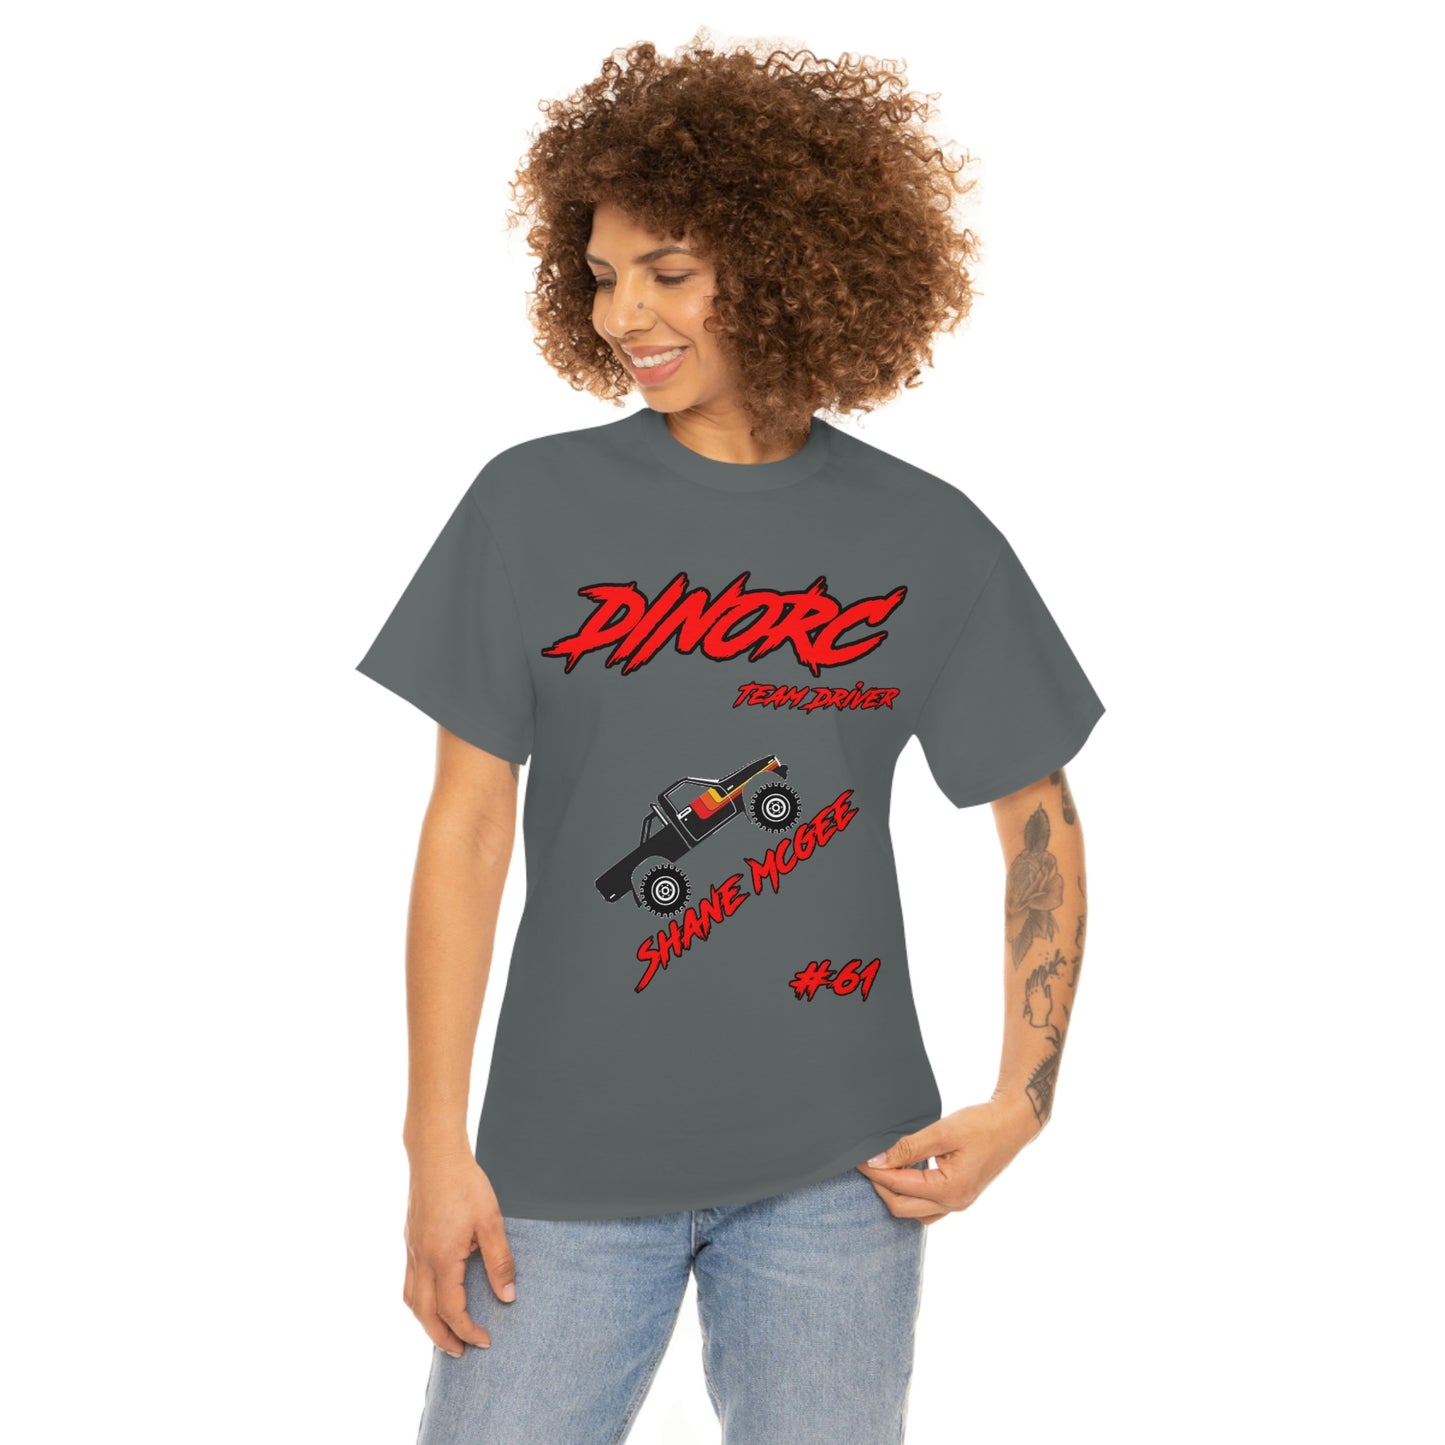 Team Driver Shane Mcgee truck logo Front and Back DinoRc Logo T-Shirt S-5x 5 colors